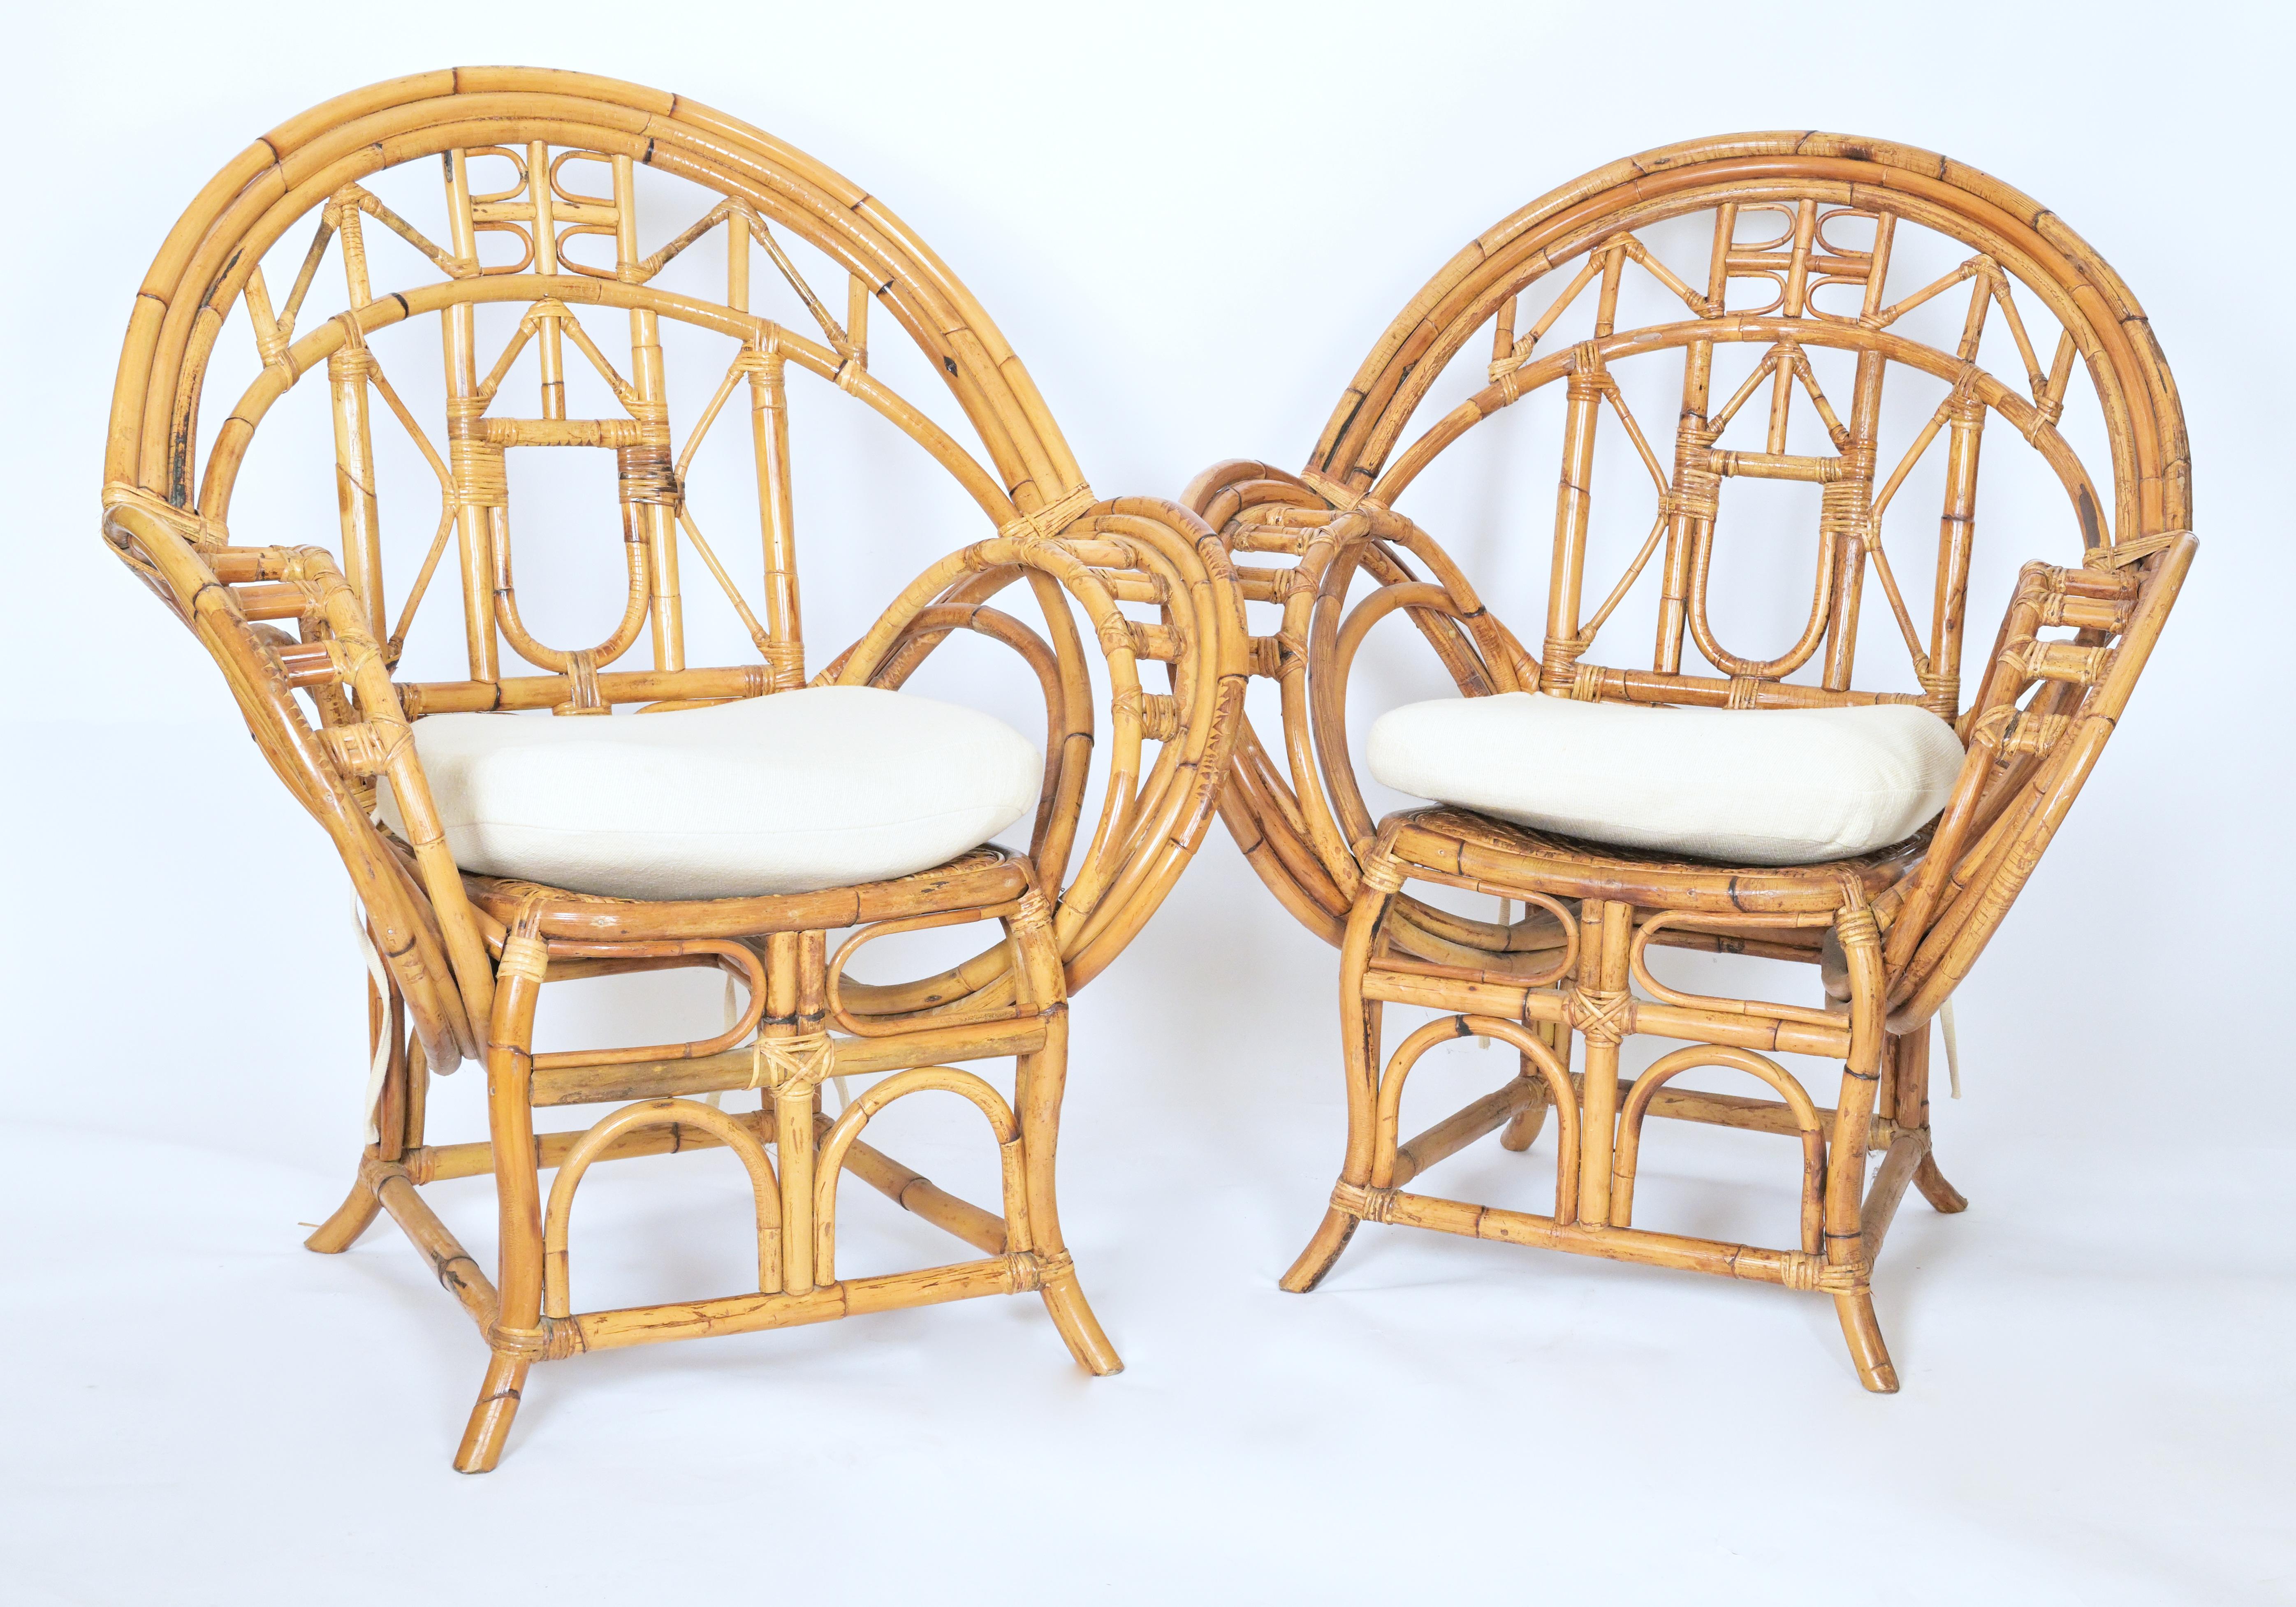 20th Century Pair of Mid-Century Modern Bamboo Caned Armchairs For Sale